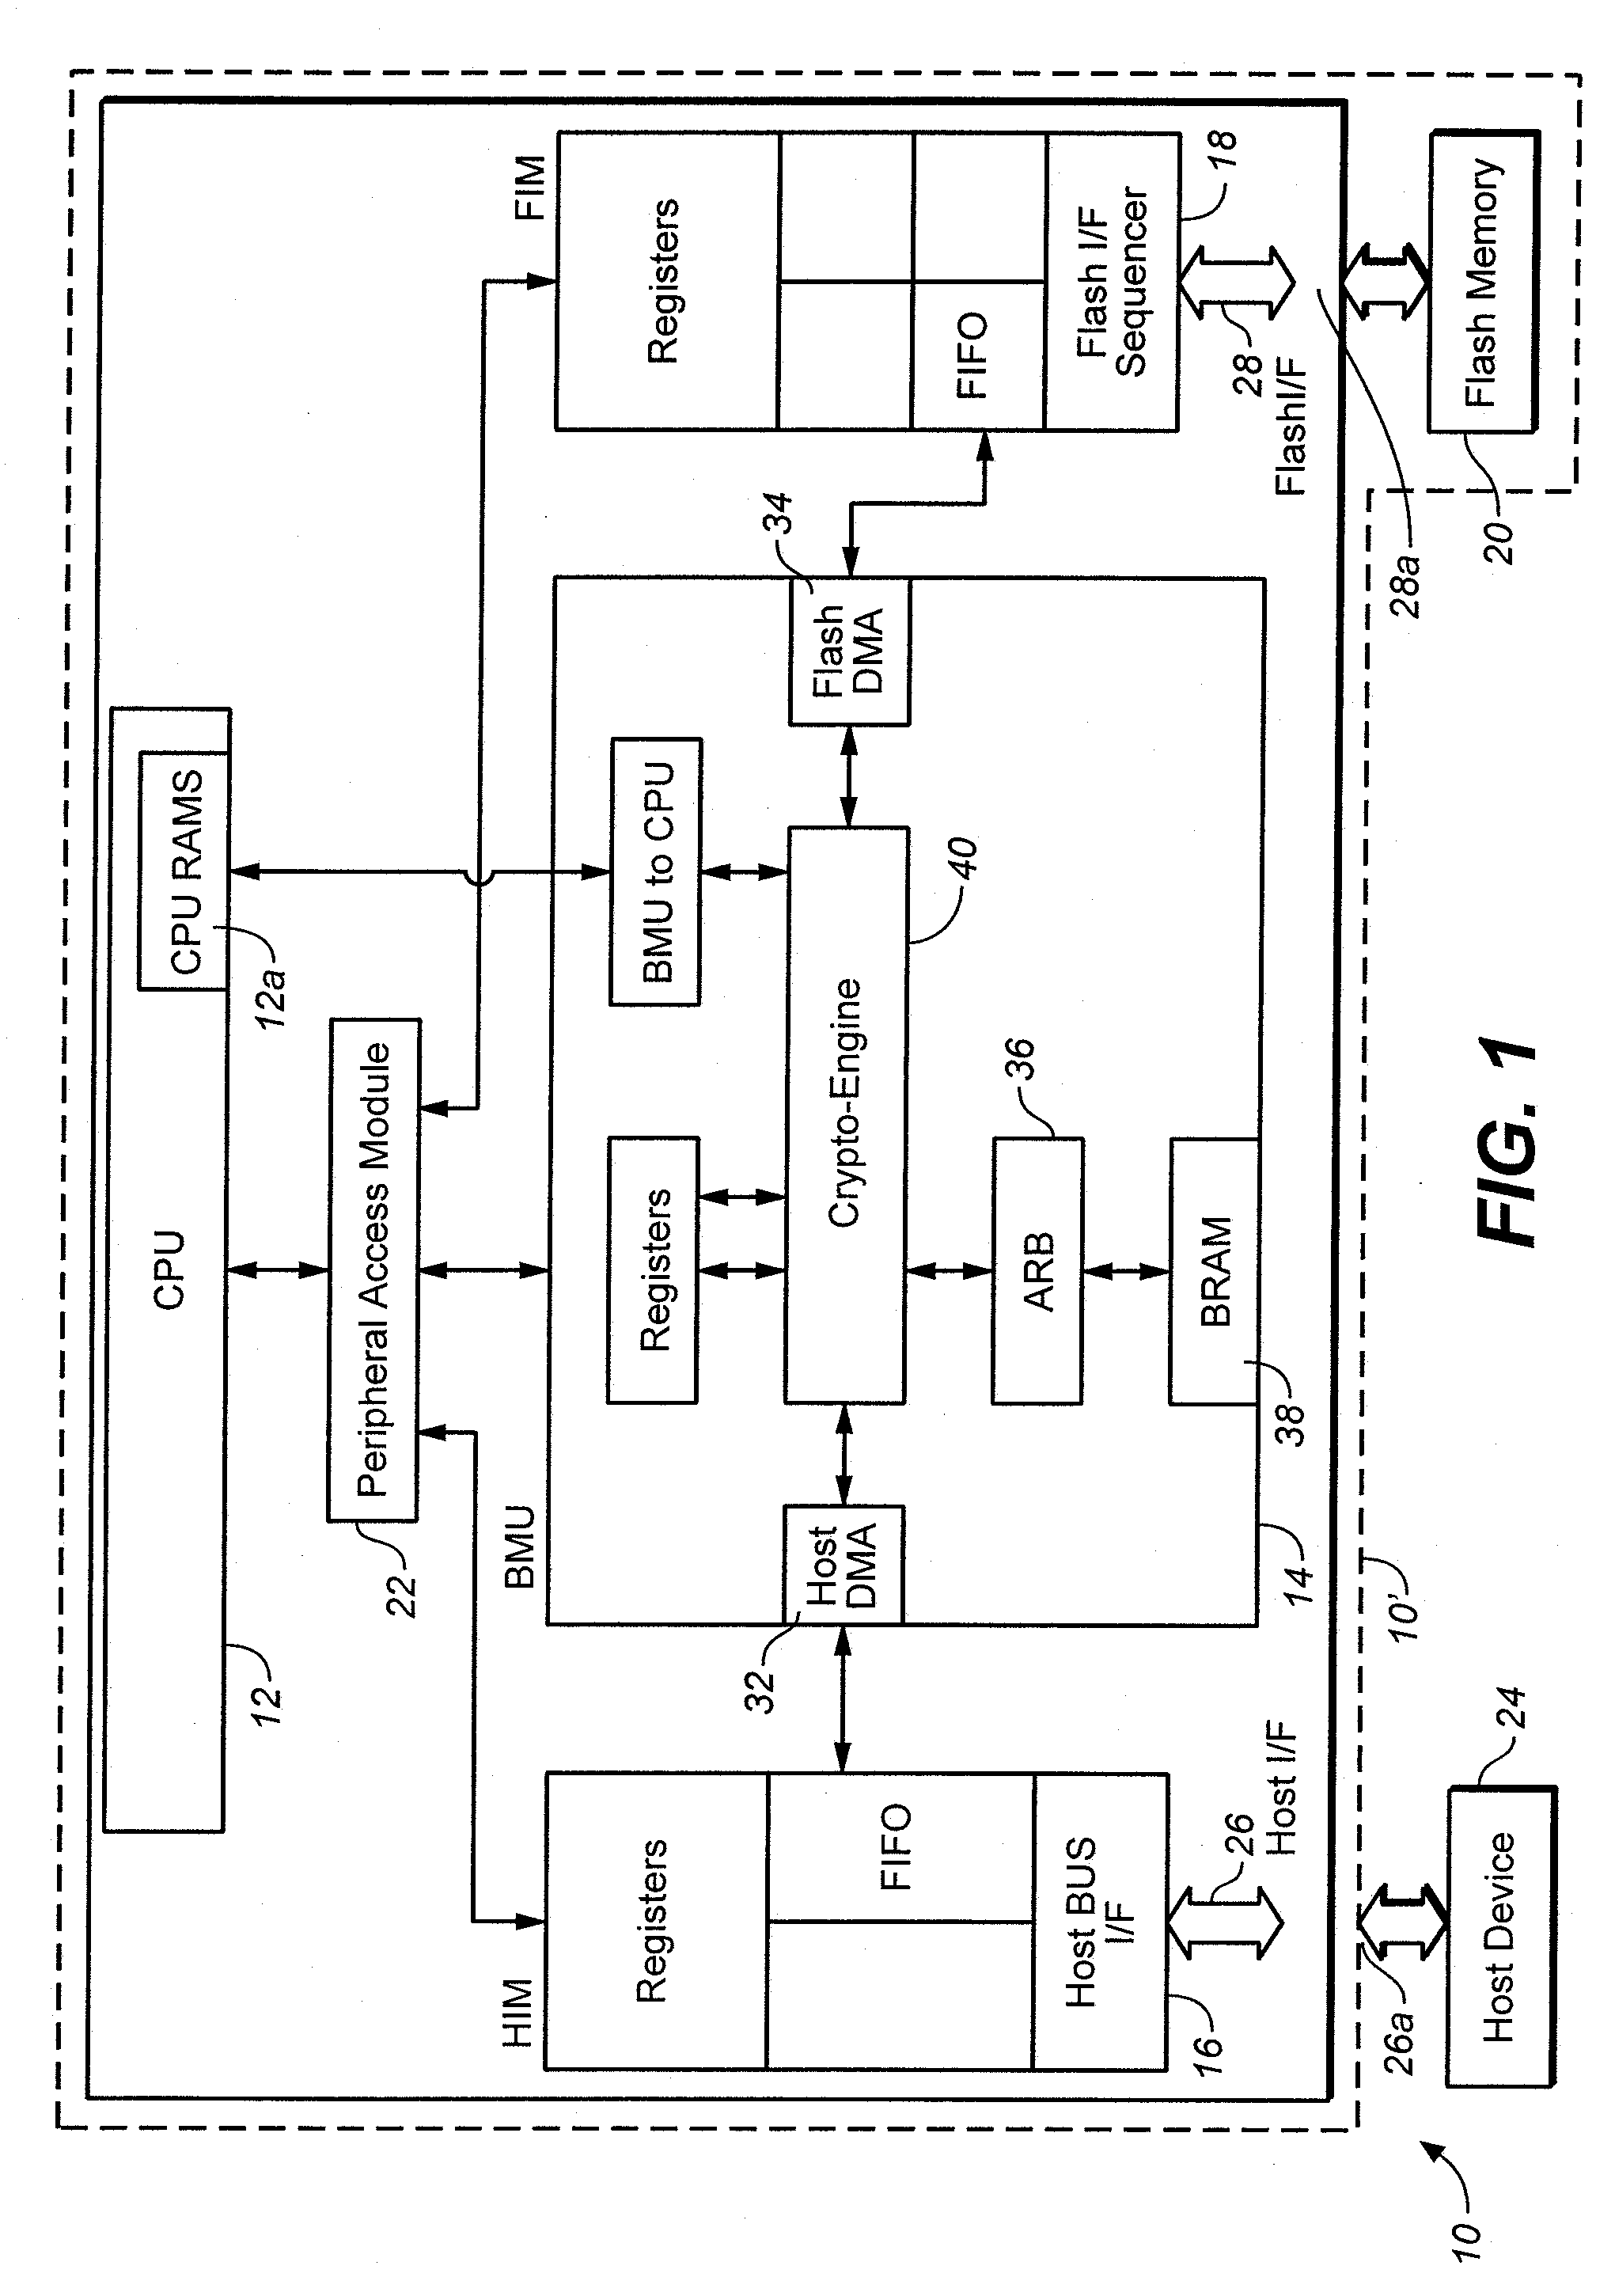 Method for versatile content control with partitioning